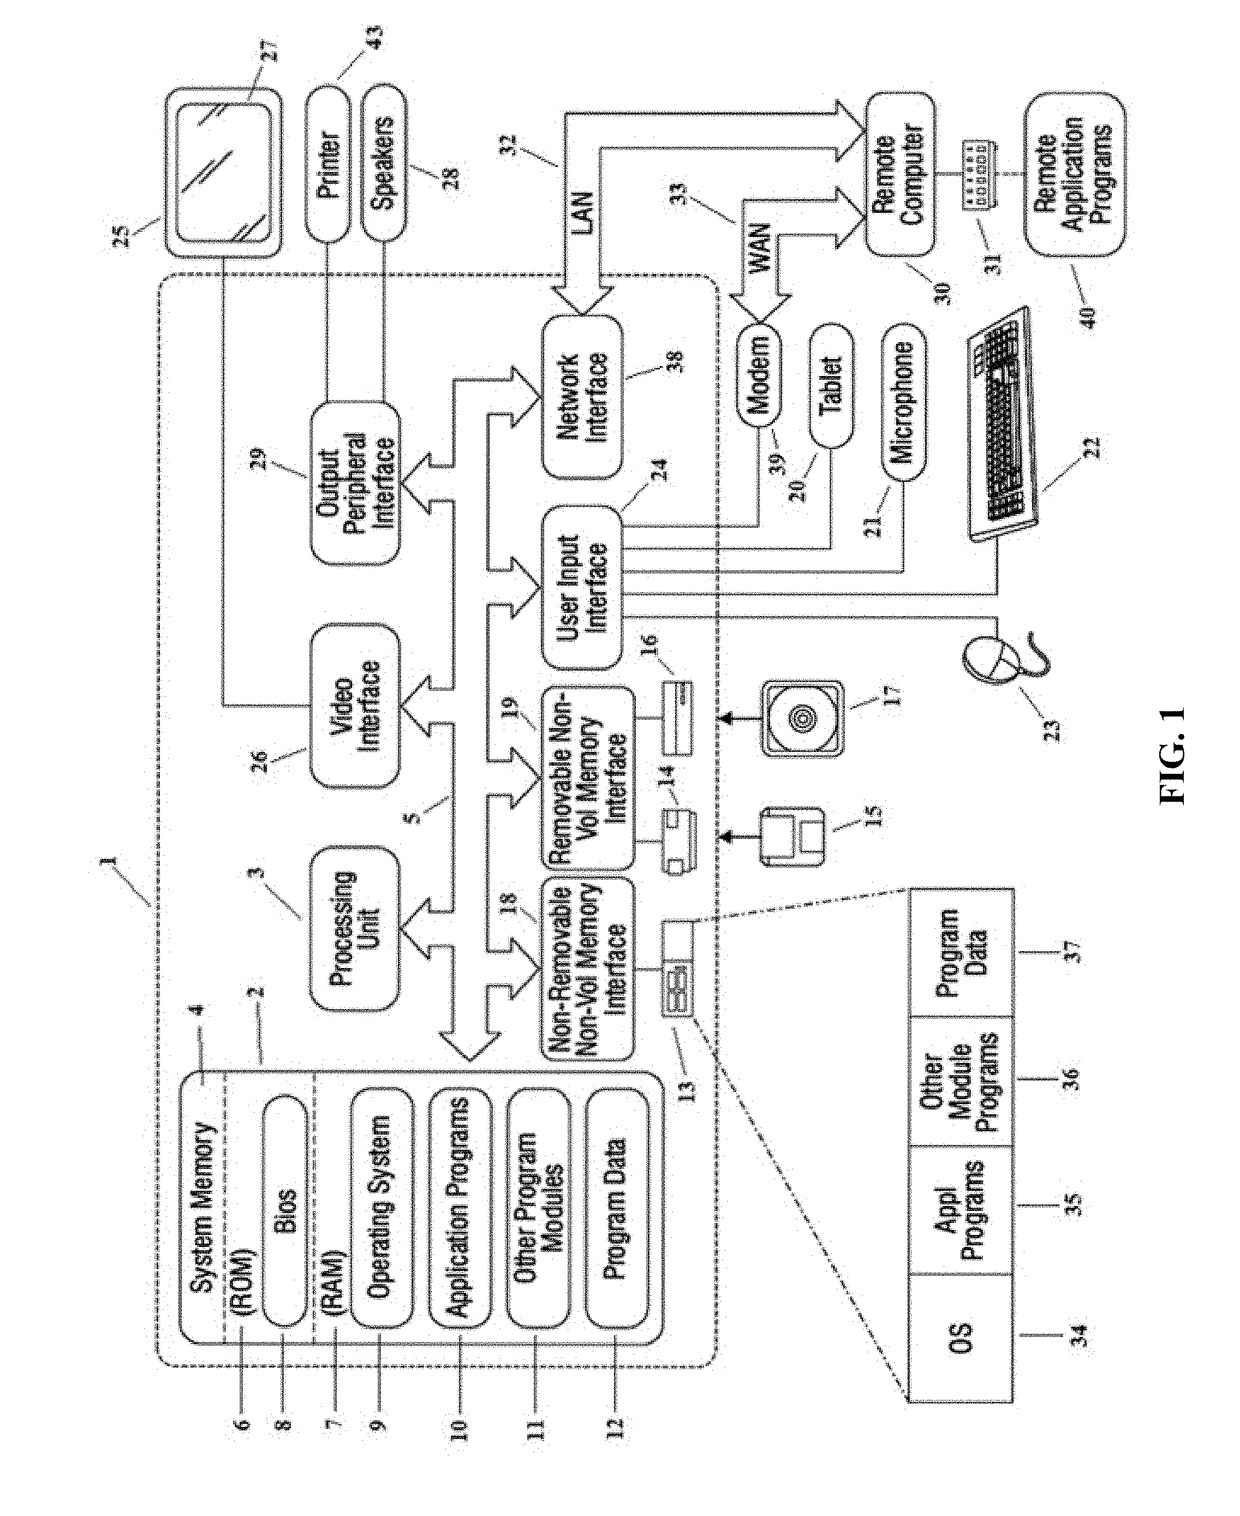 Apparatus and Method for Mediating Uploadable Content